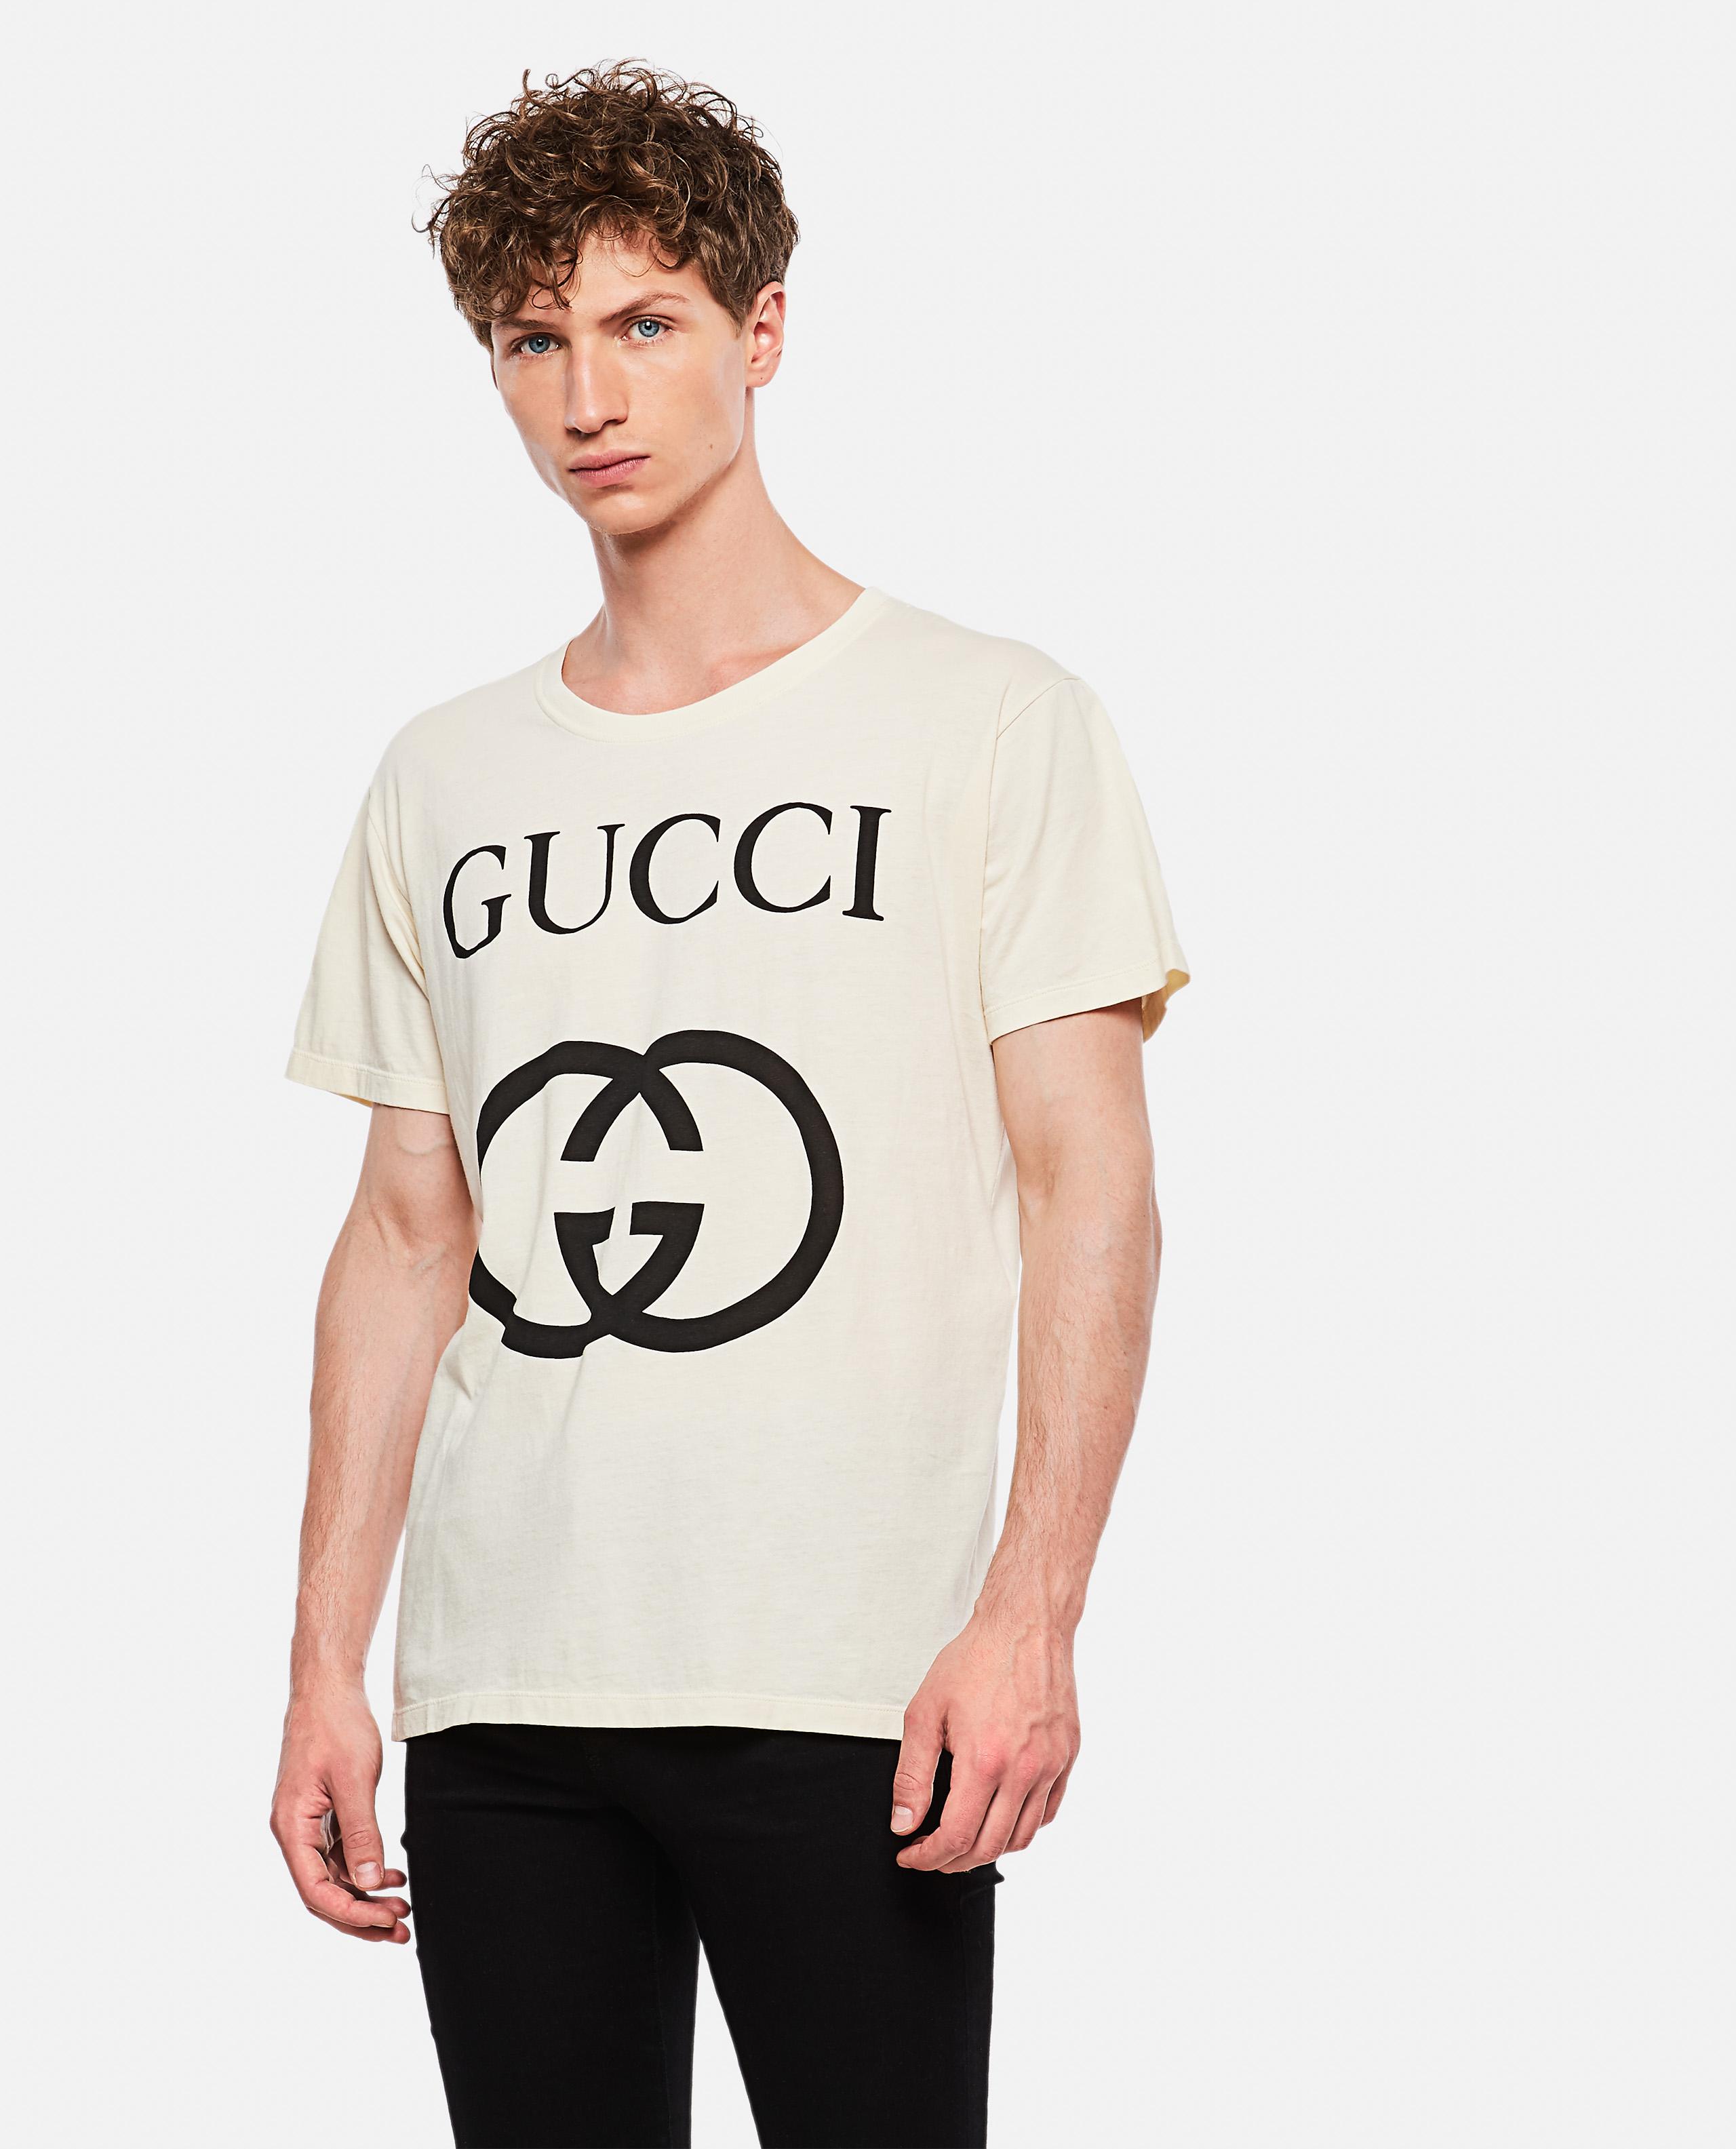 Gucci Oversized T-shirt With Gg Print in White for Men - Lyst